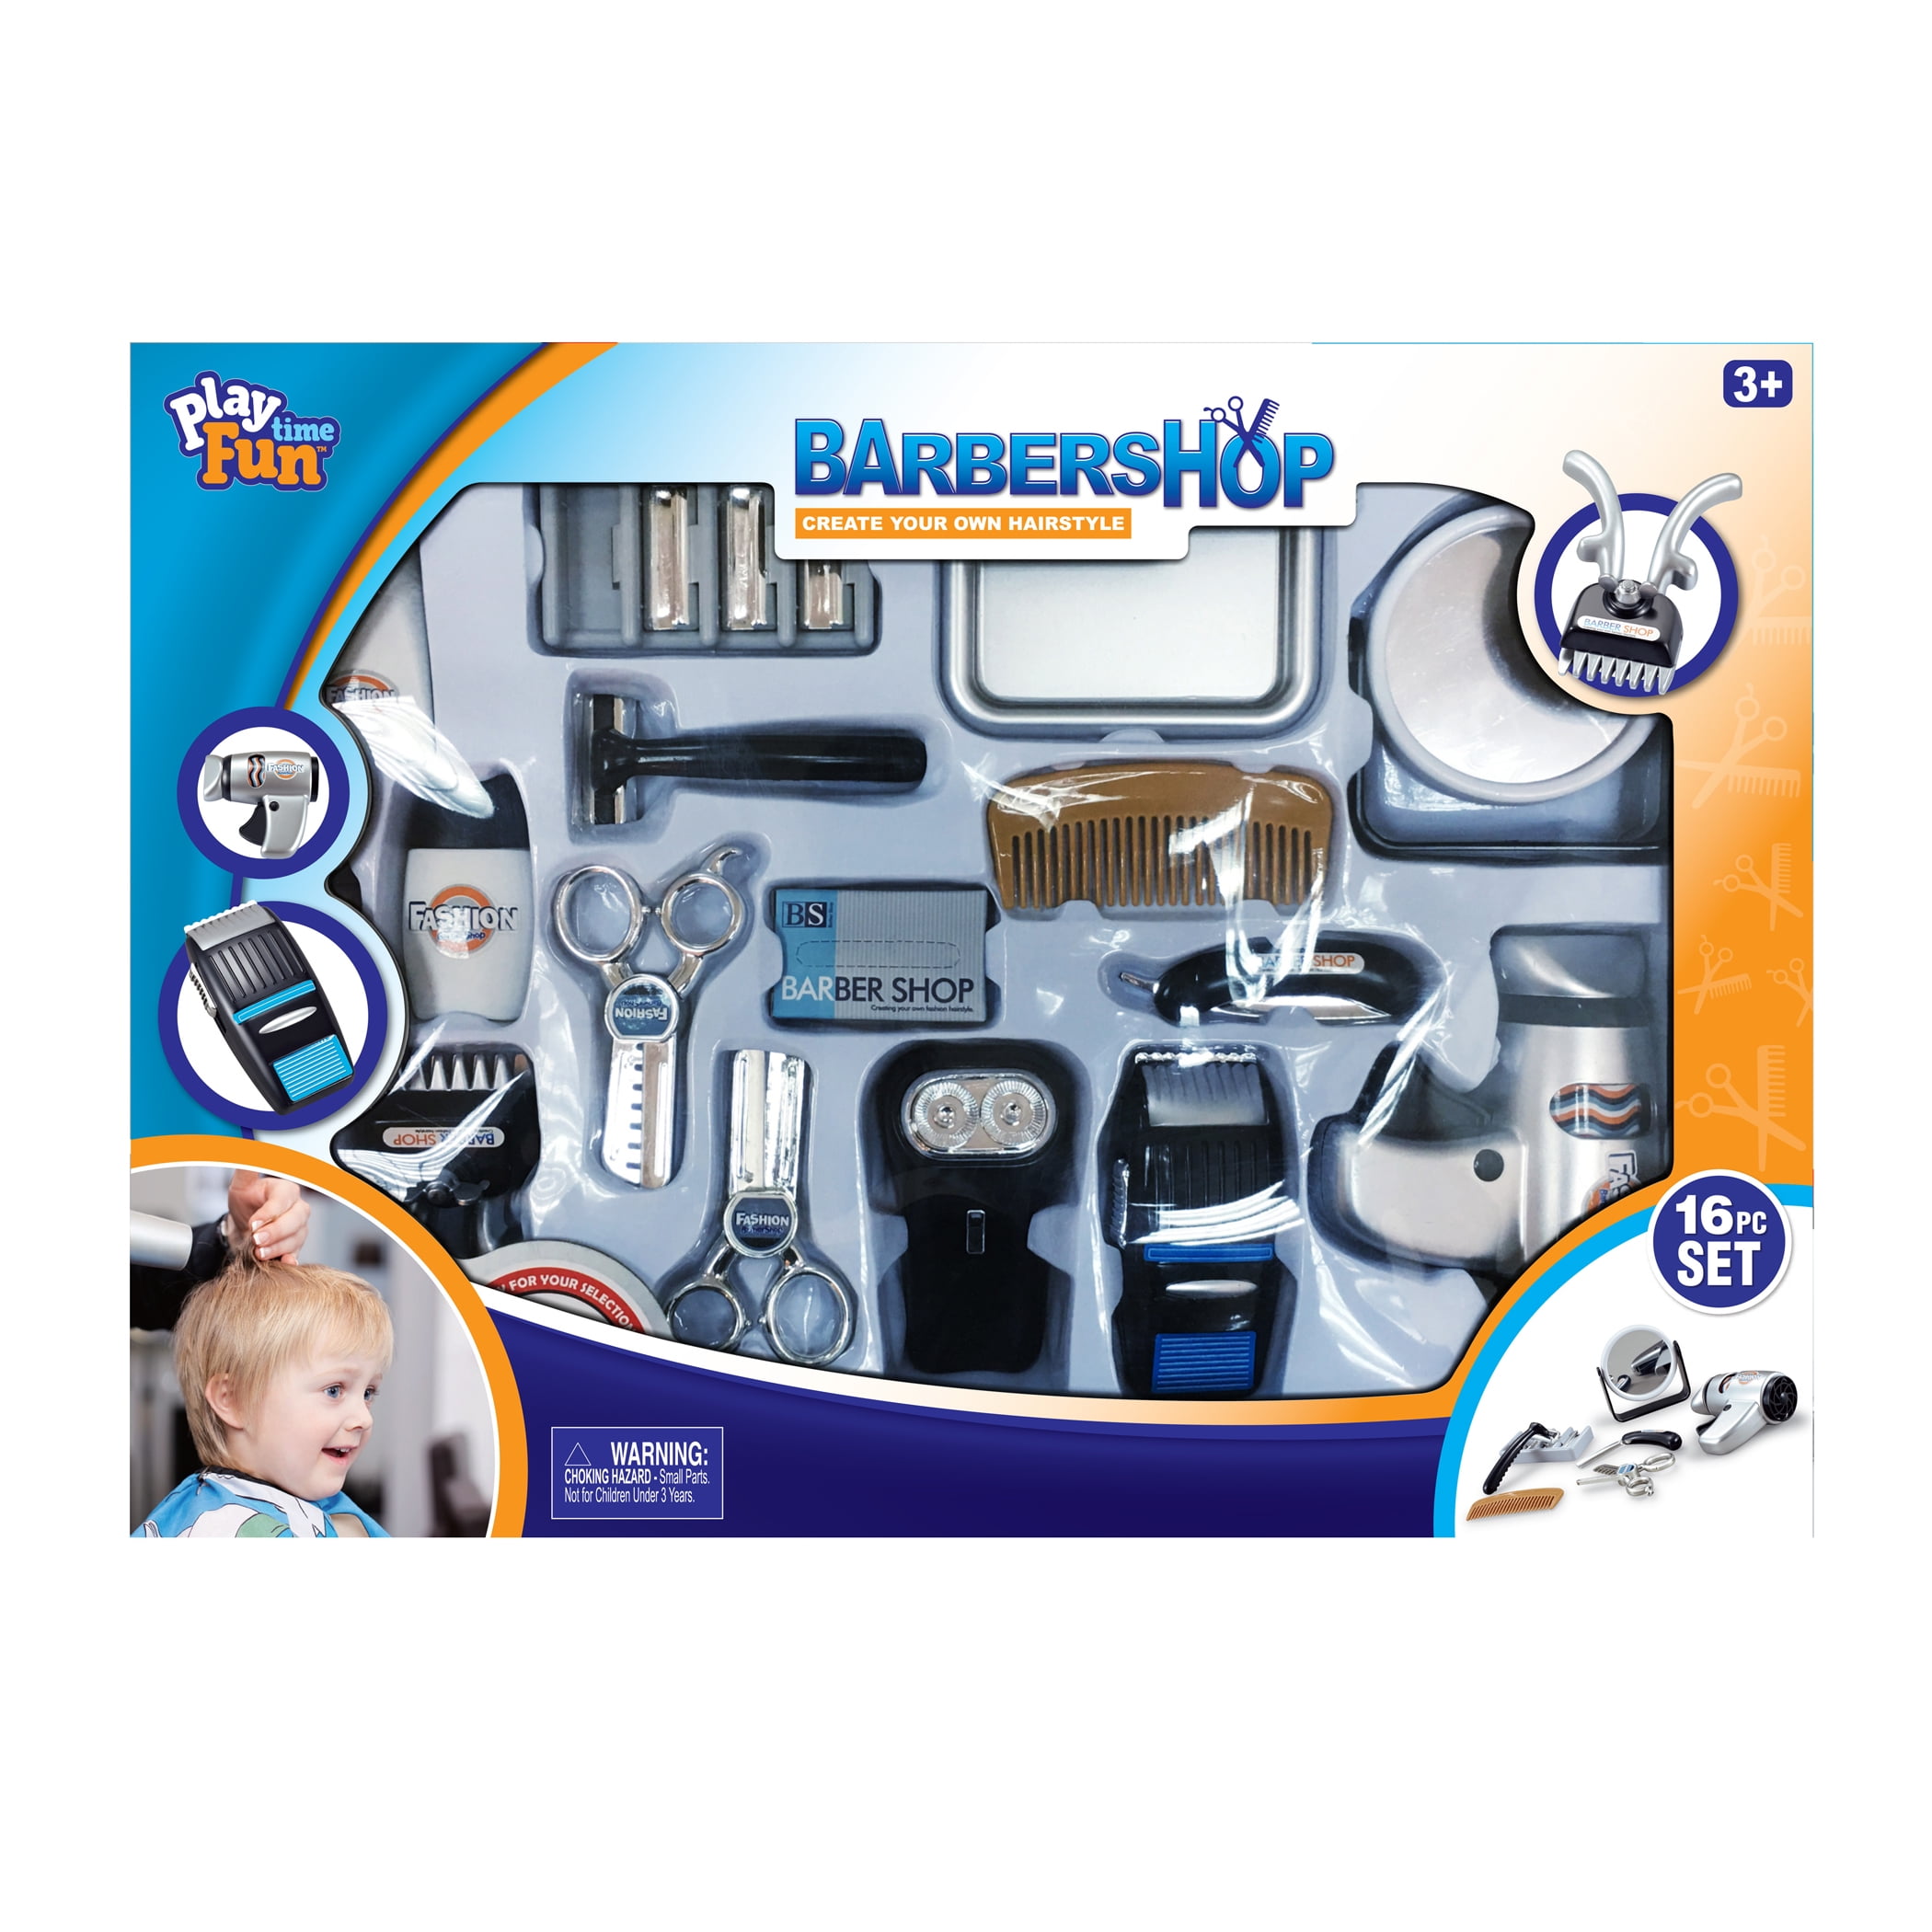 Play Accessories Barber Shop Salon Hairstyle Play Set Kids with Mirror toy kit C 